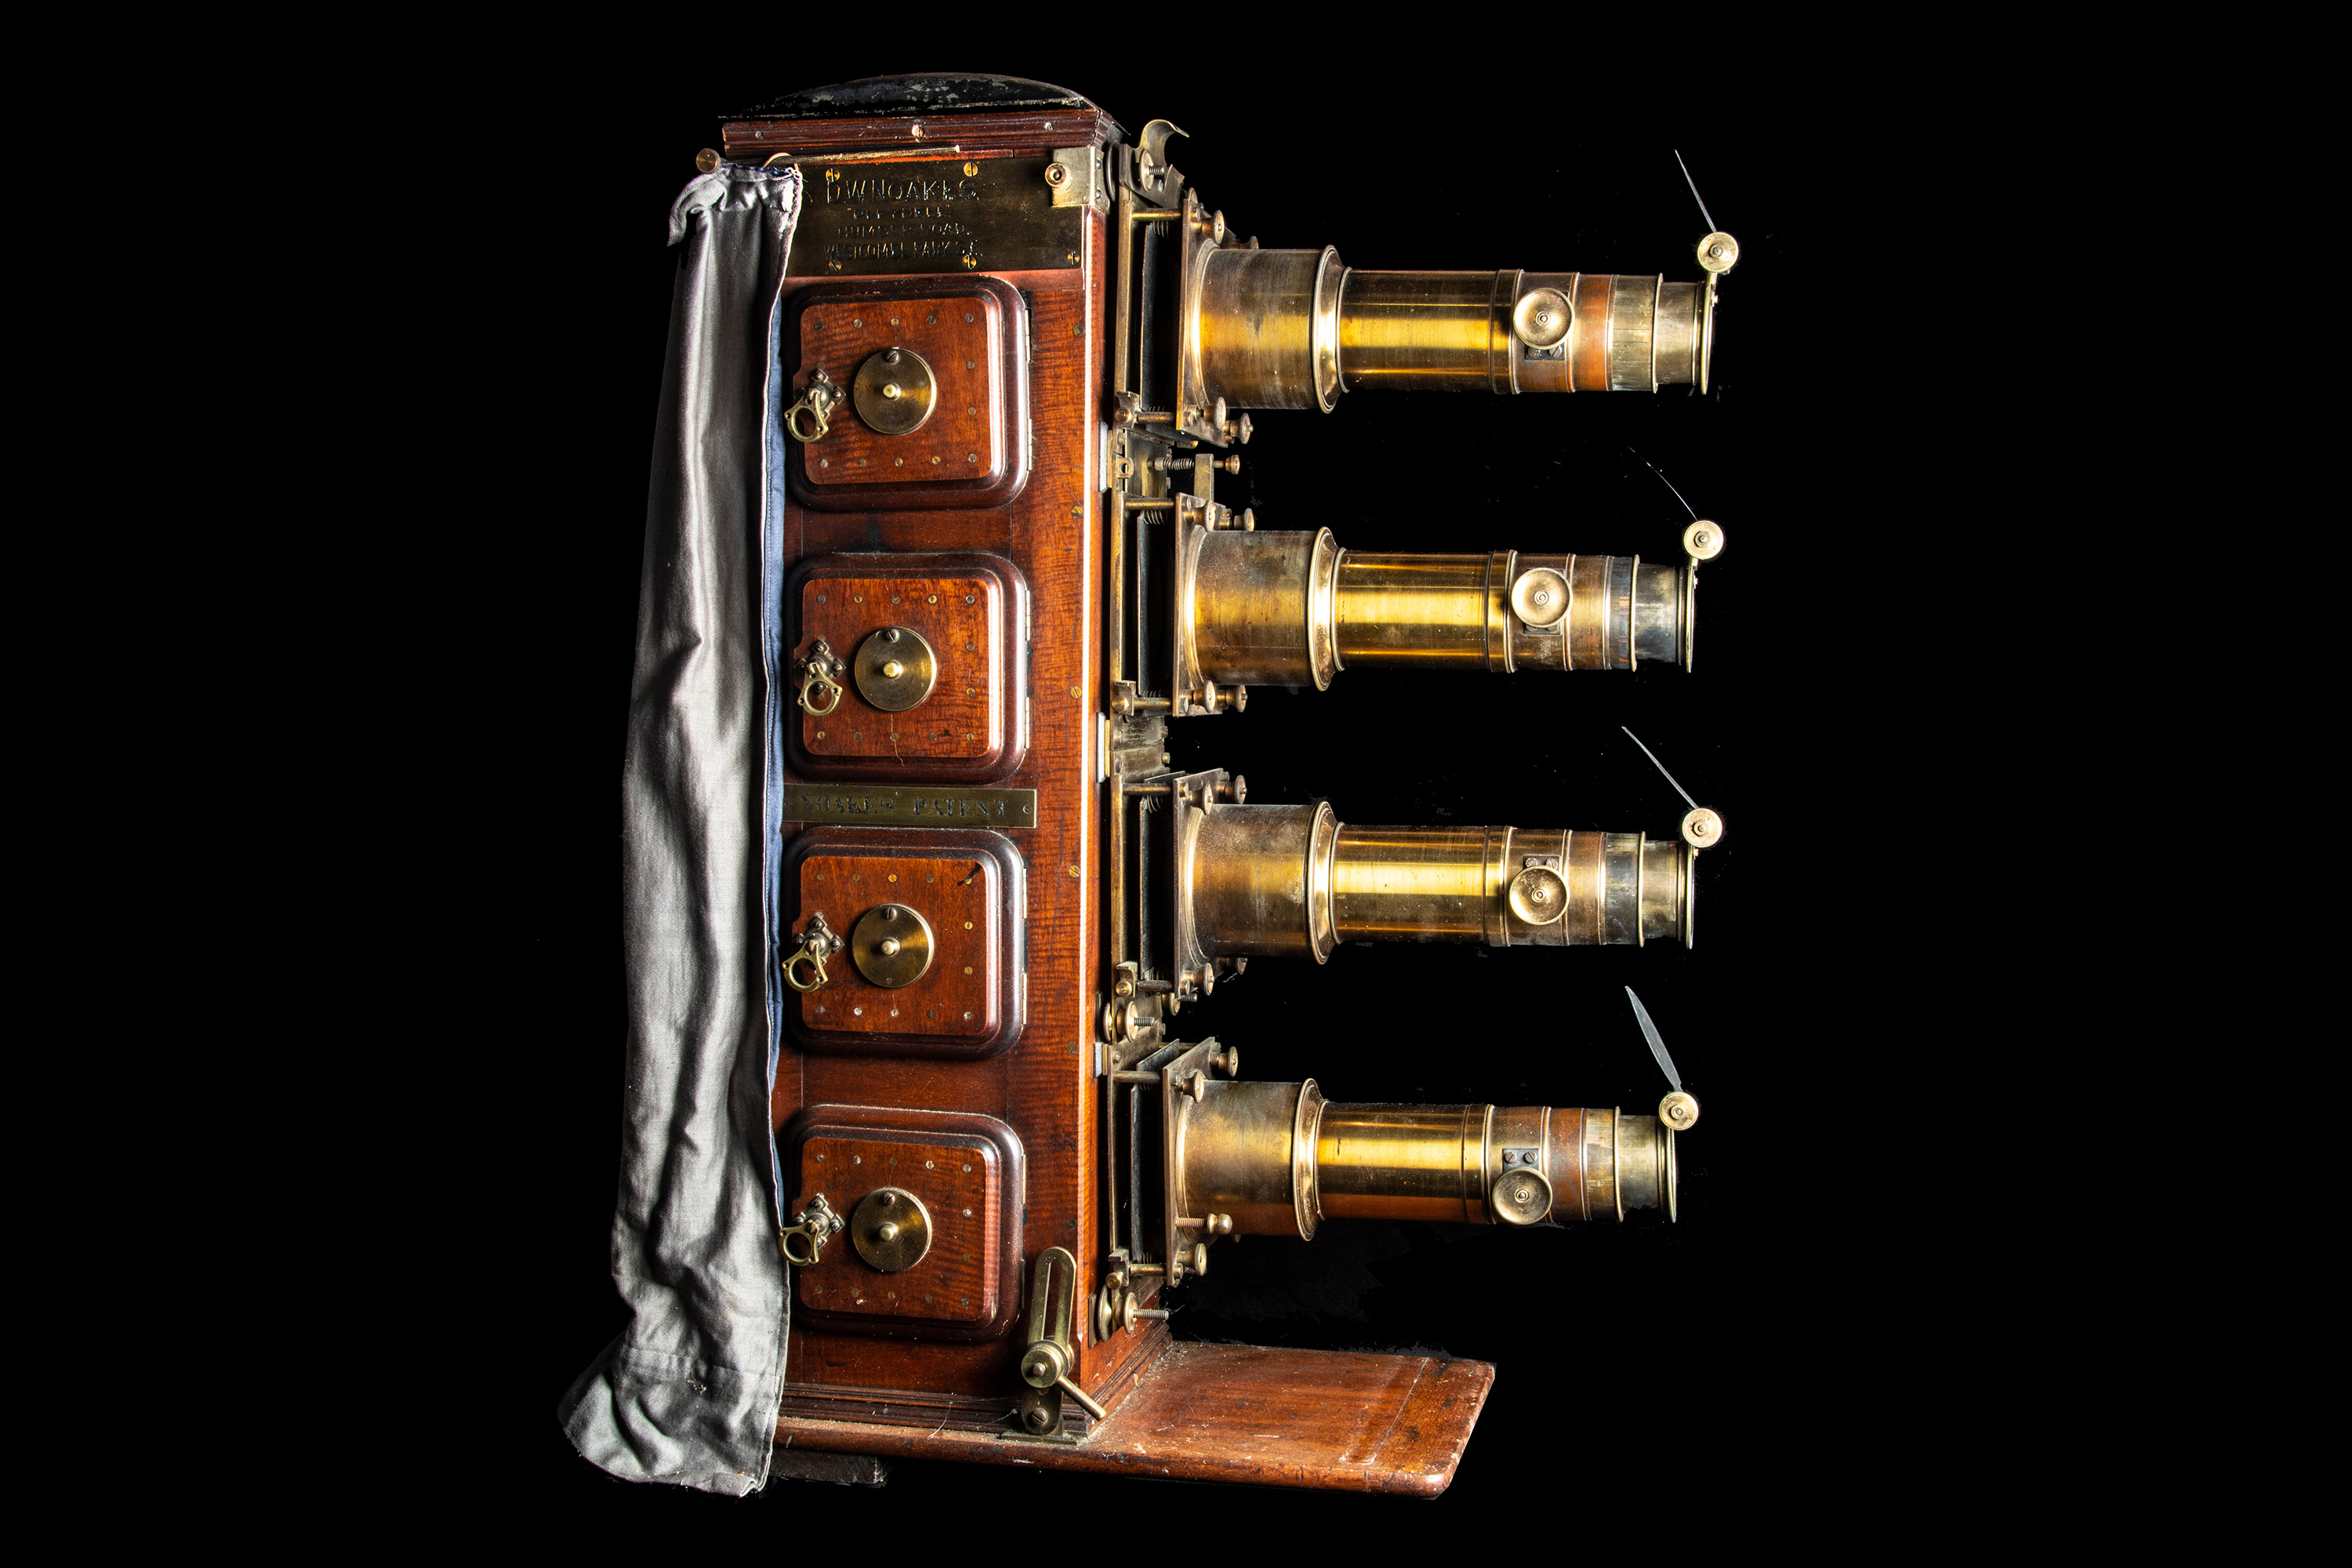 The Noakes 'Quad' Magic Lantern or Noakesoscope (Special Auction Services wishes to extend its